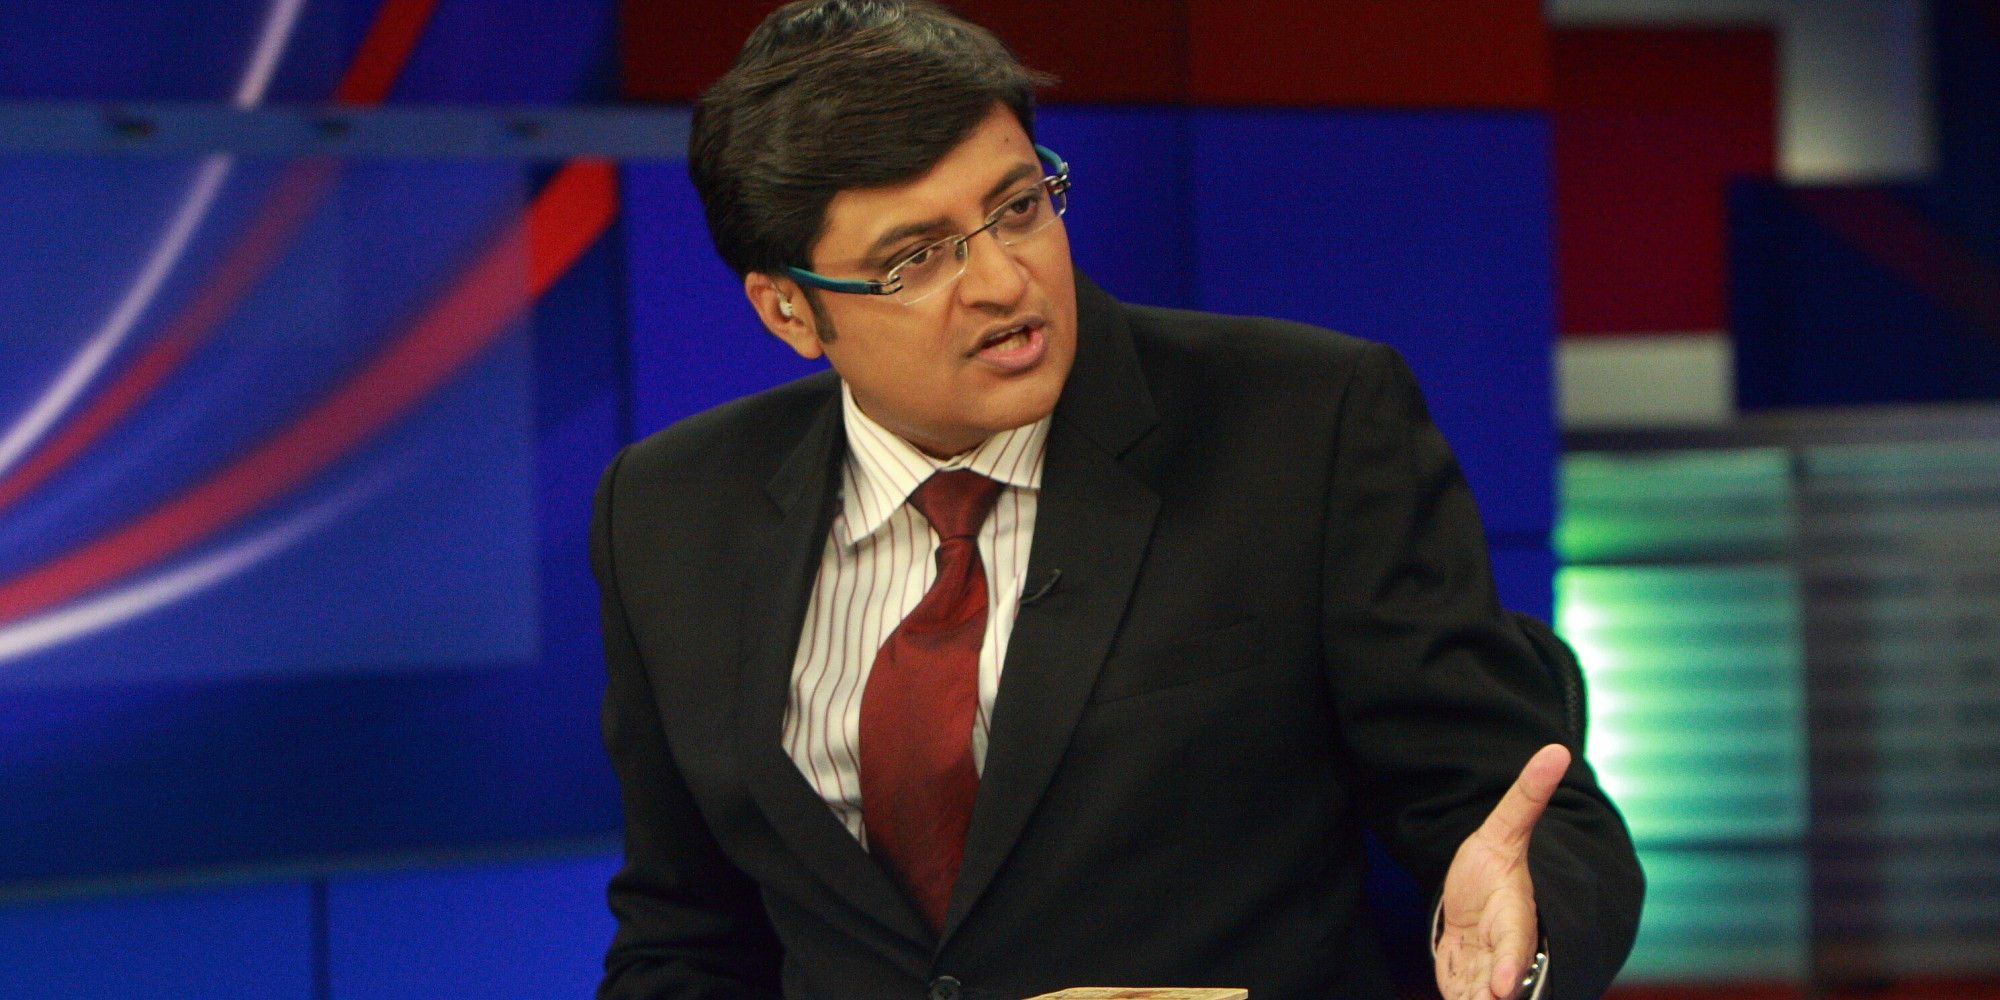 Arnab Goswami seeks support of people after announcing his new venture 'Republic'